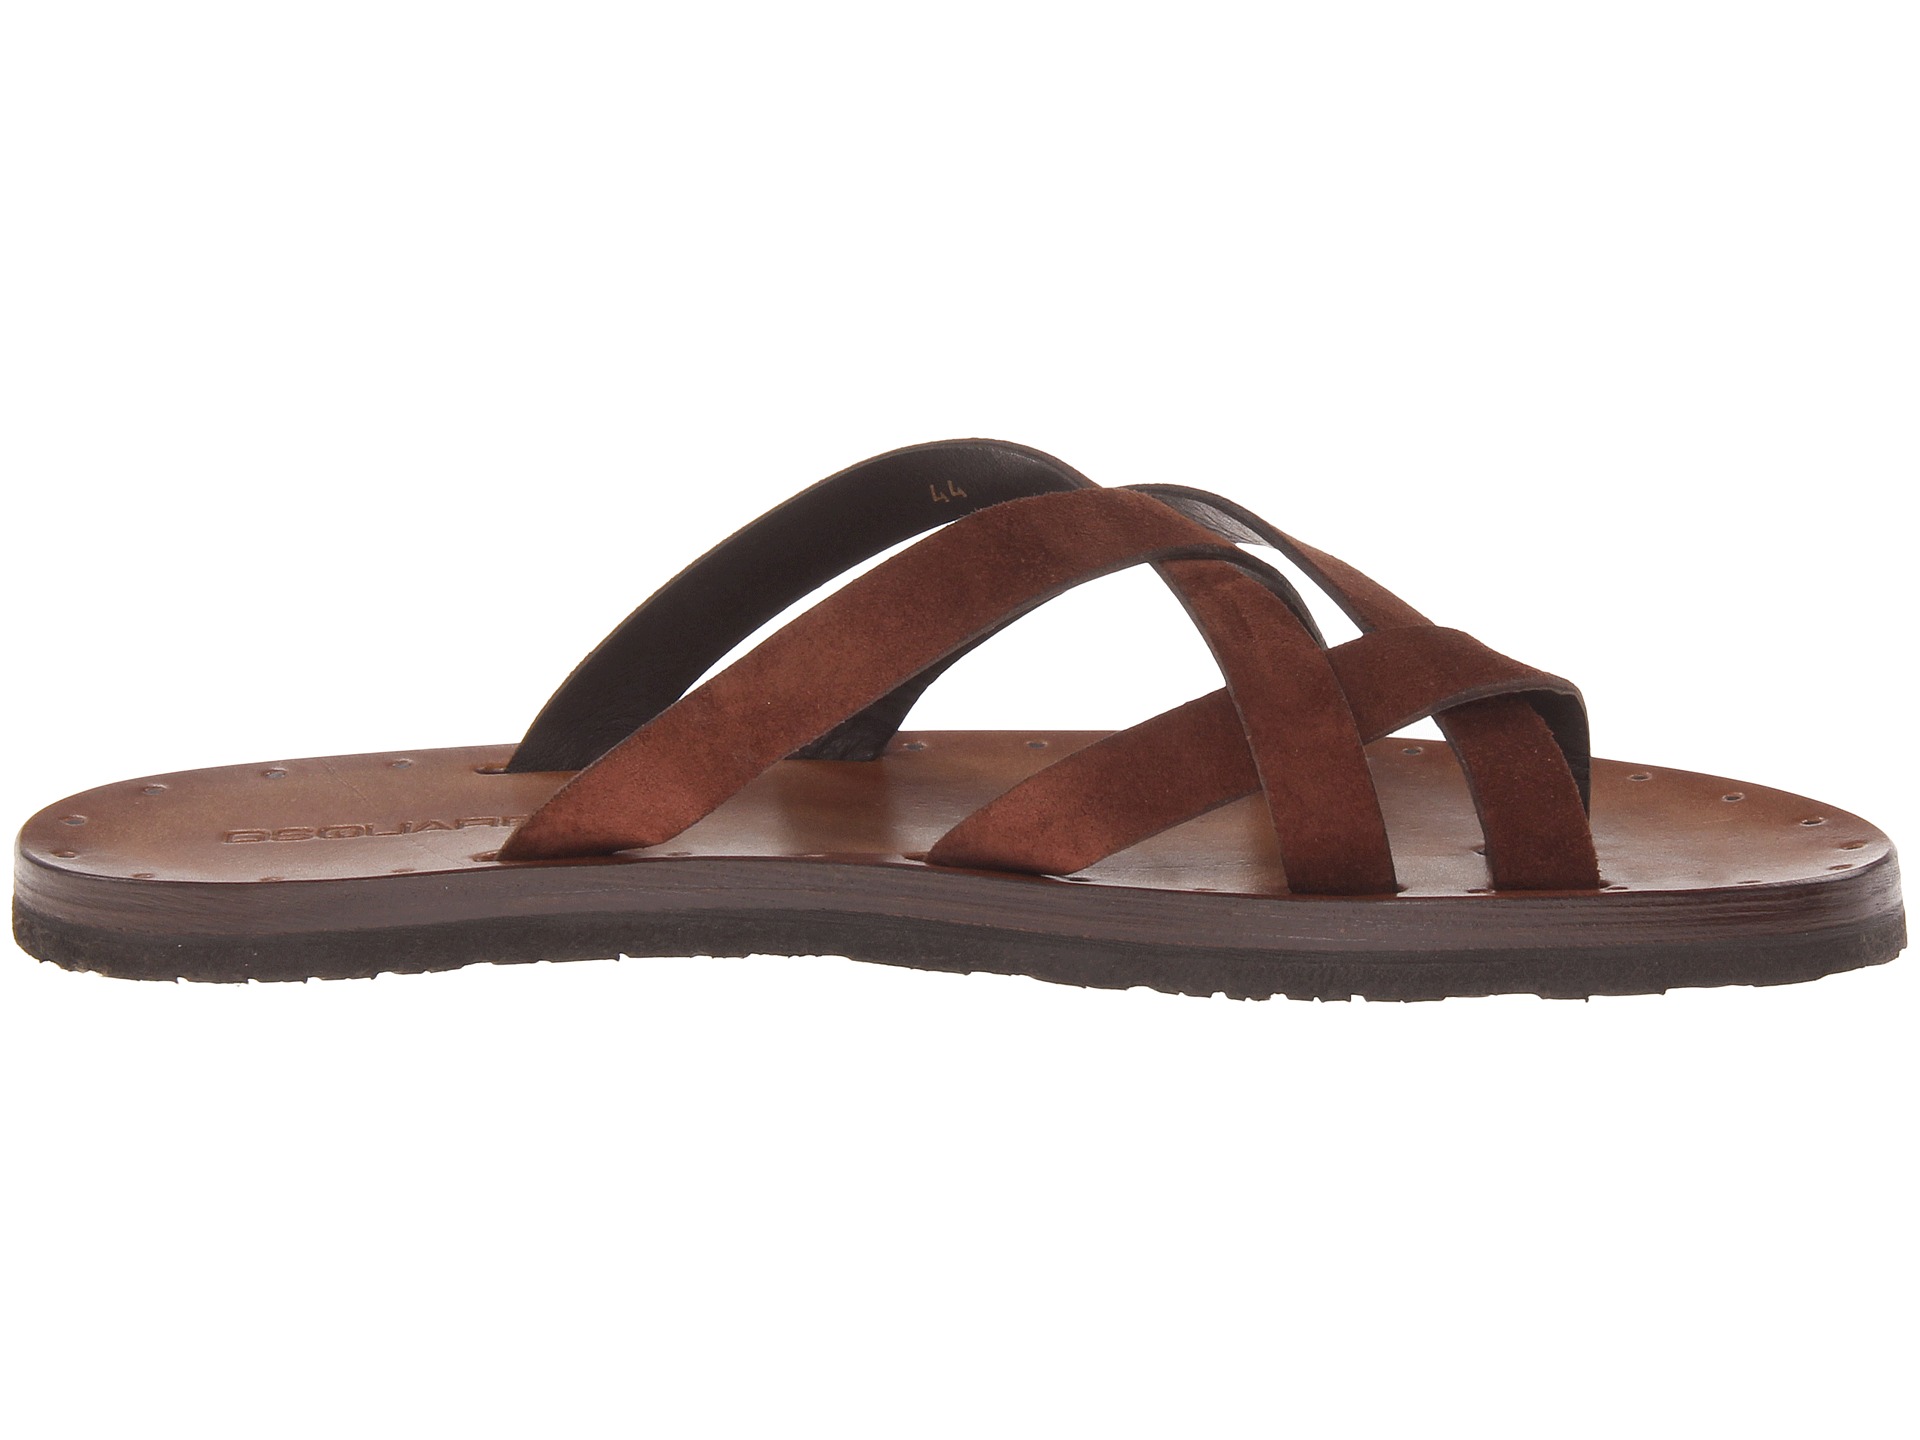 Dsquared2 Jesus On The Beach Toe Ring Sandal Marrone | Shipped Free at ...